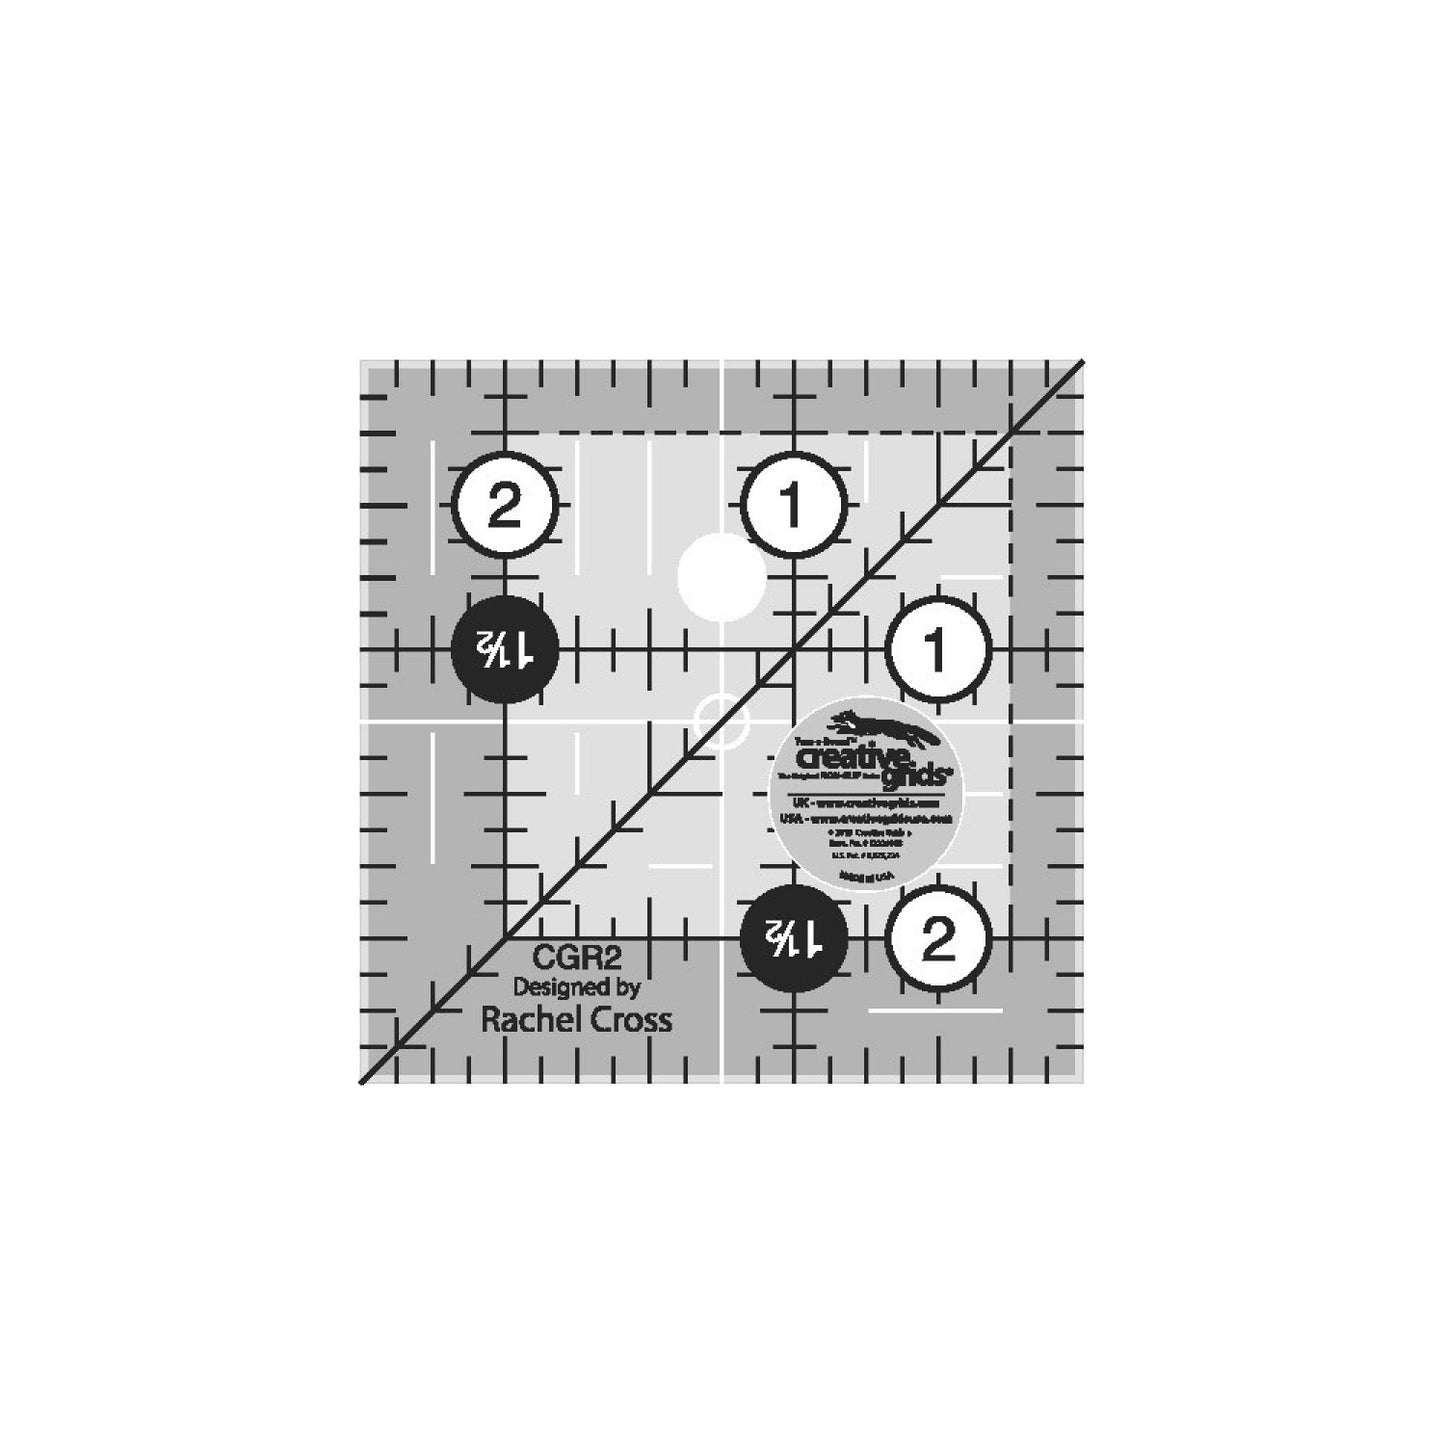 2-1/2in Square Quilt Ruler | Creative Grids